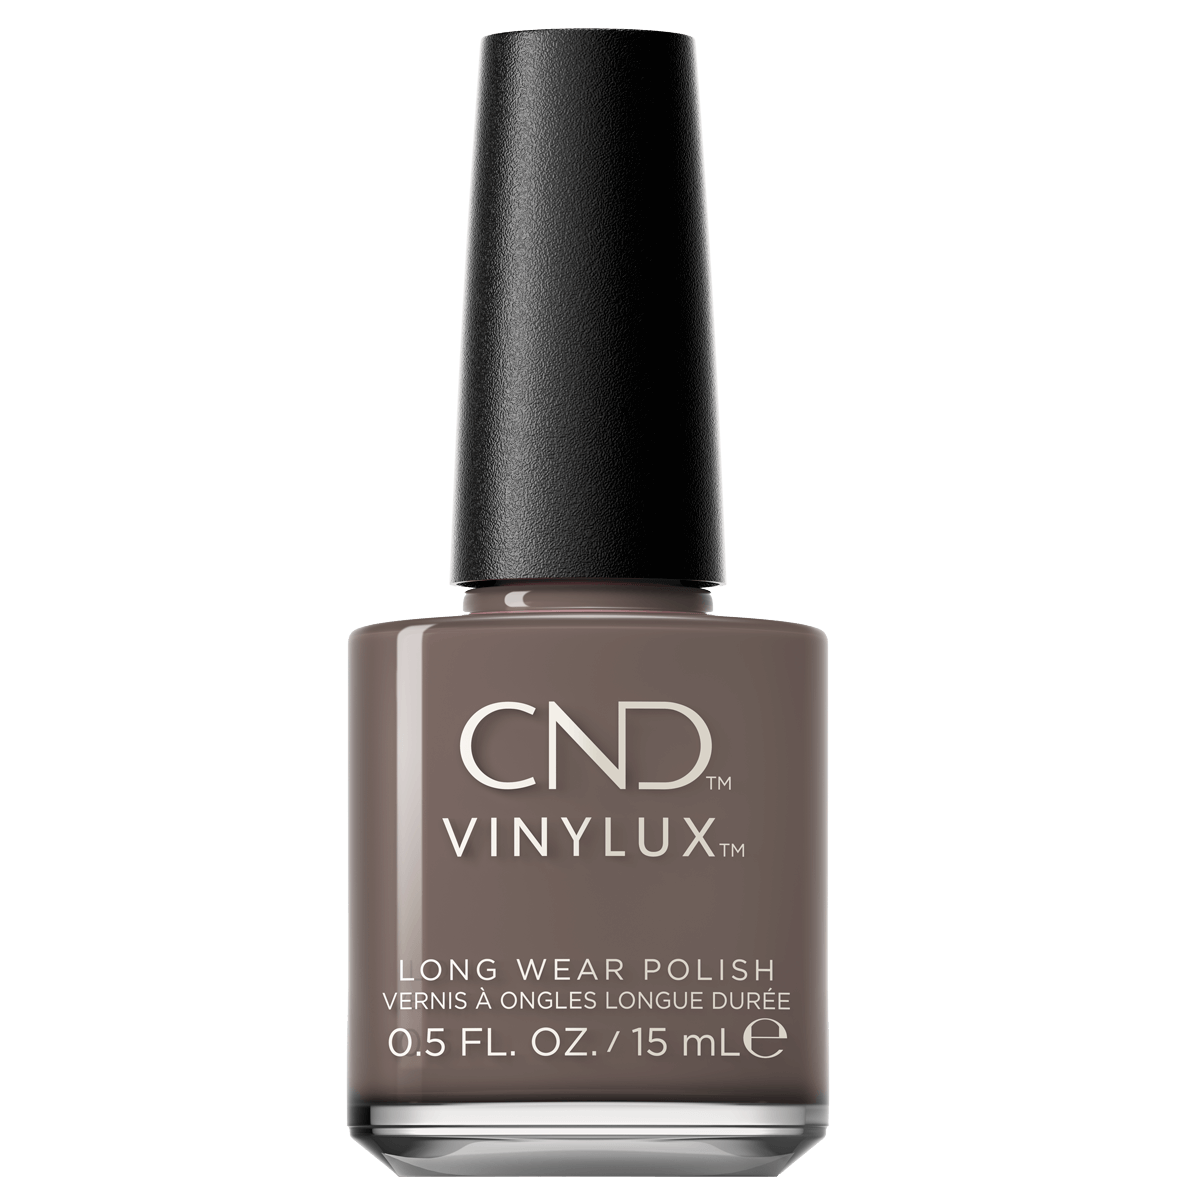 Vinylux CND Vernis à Ongles #429 Above my Pay Gray-ed 15mL